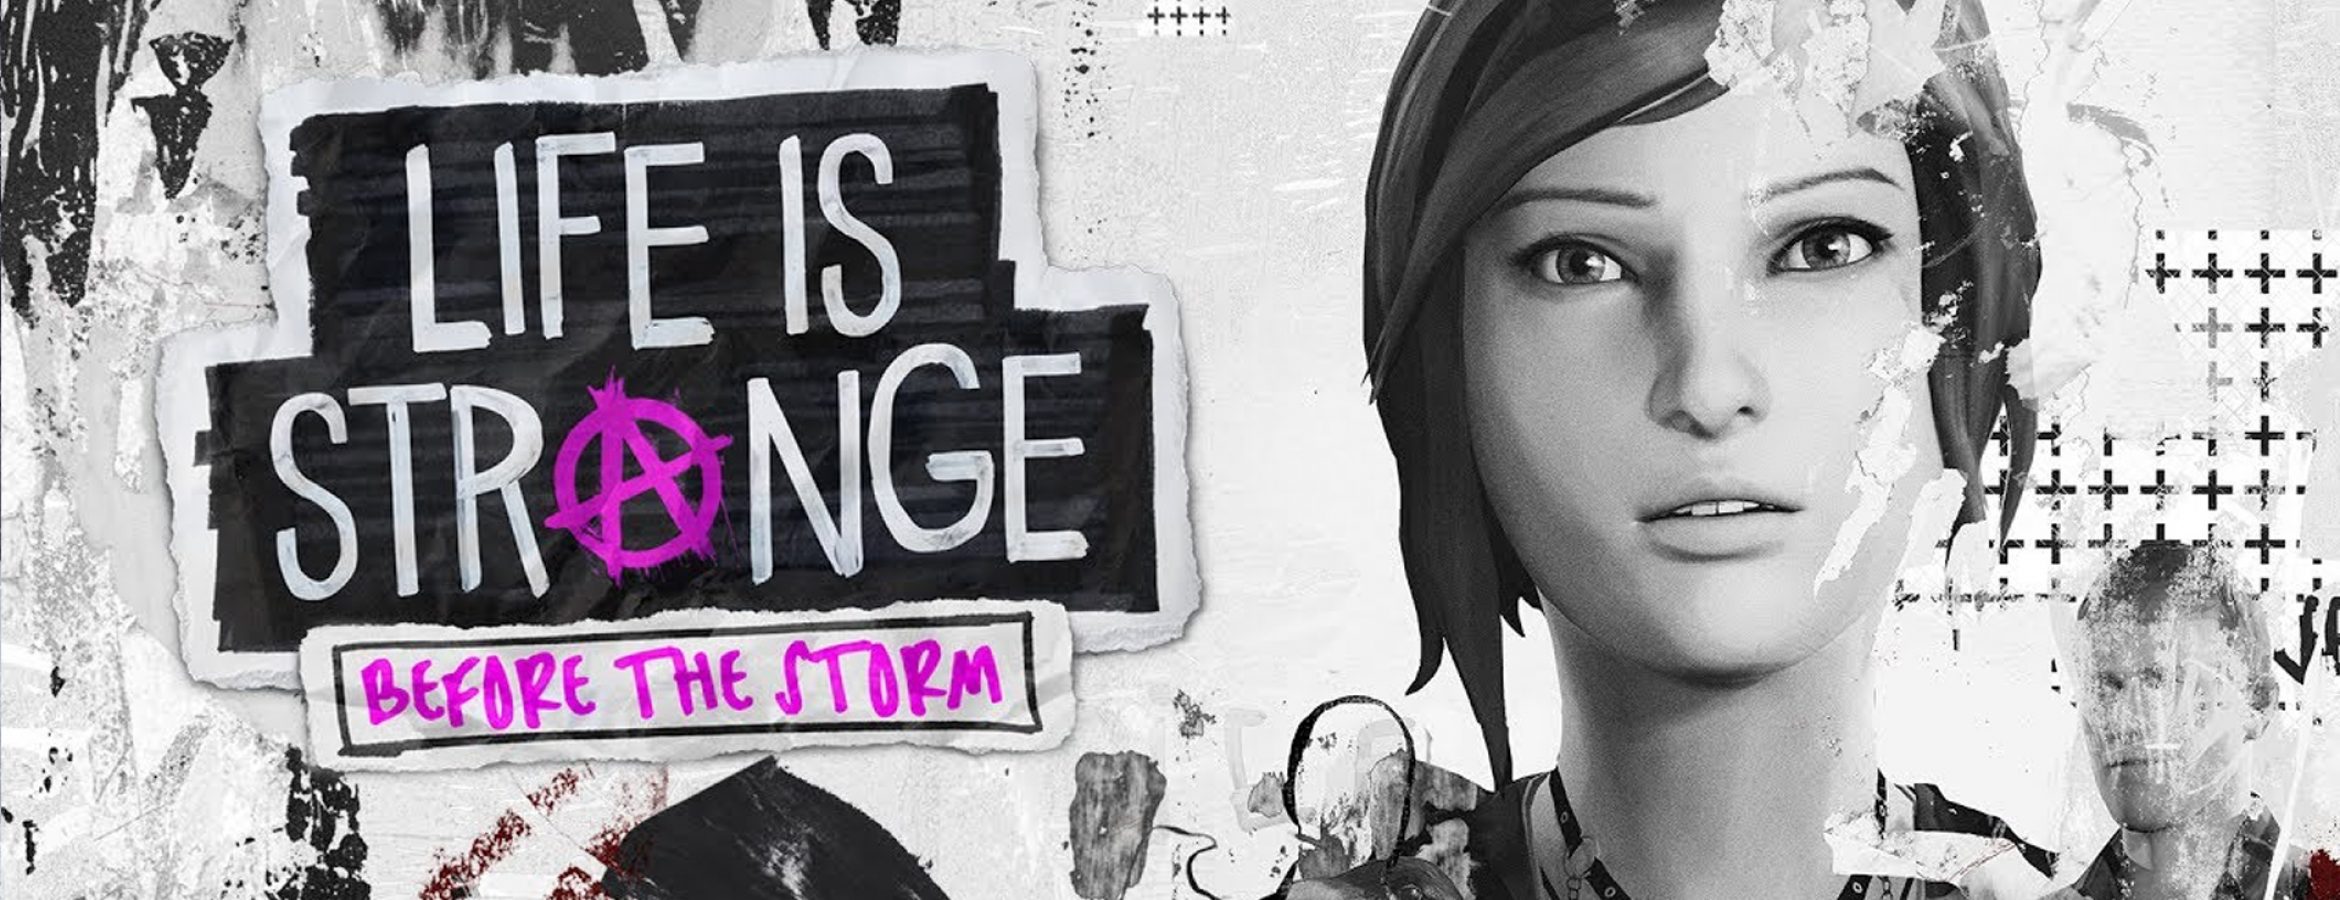 X life. Life is Strange before the Storm икона. Игра жизнь за 10 минут. Life is Strange Cover ps4 Cover ps4.